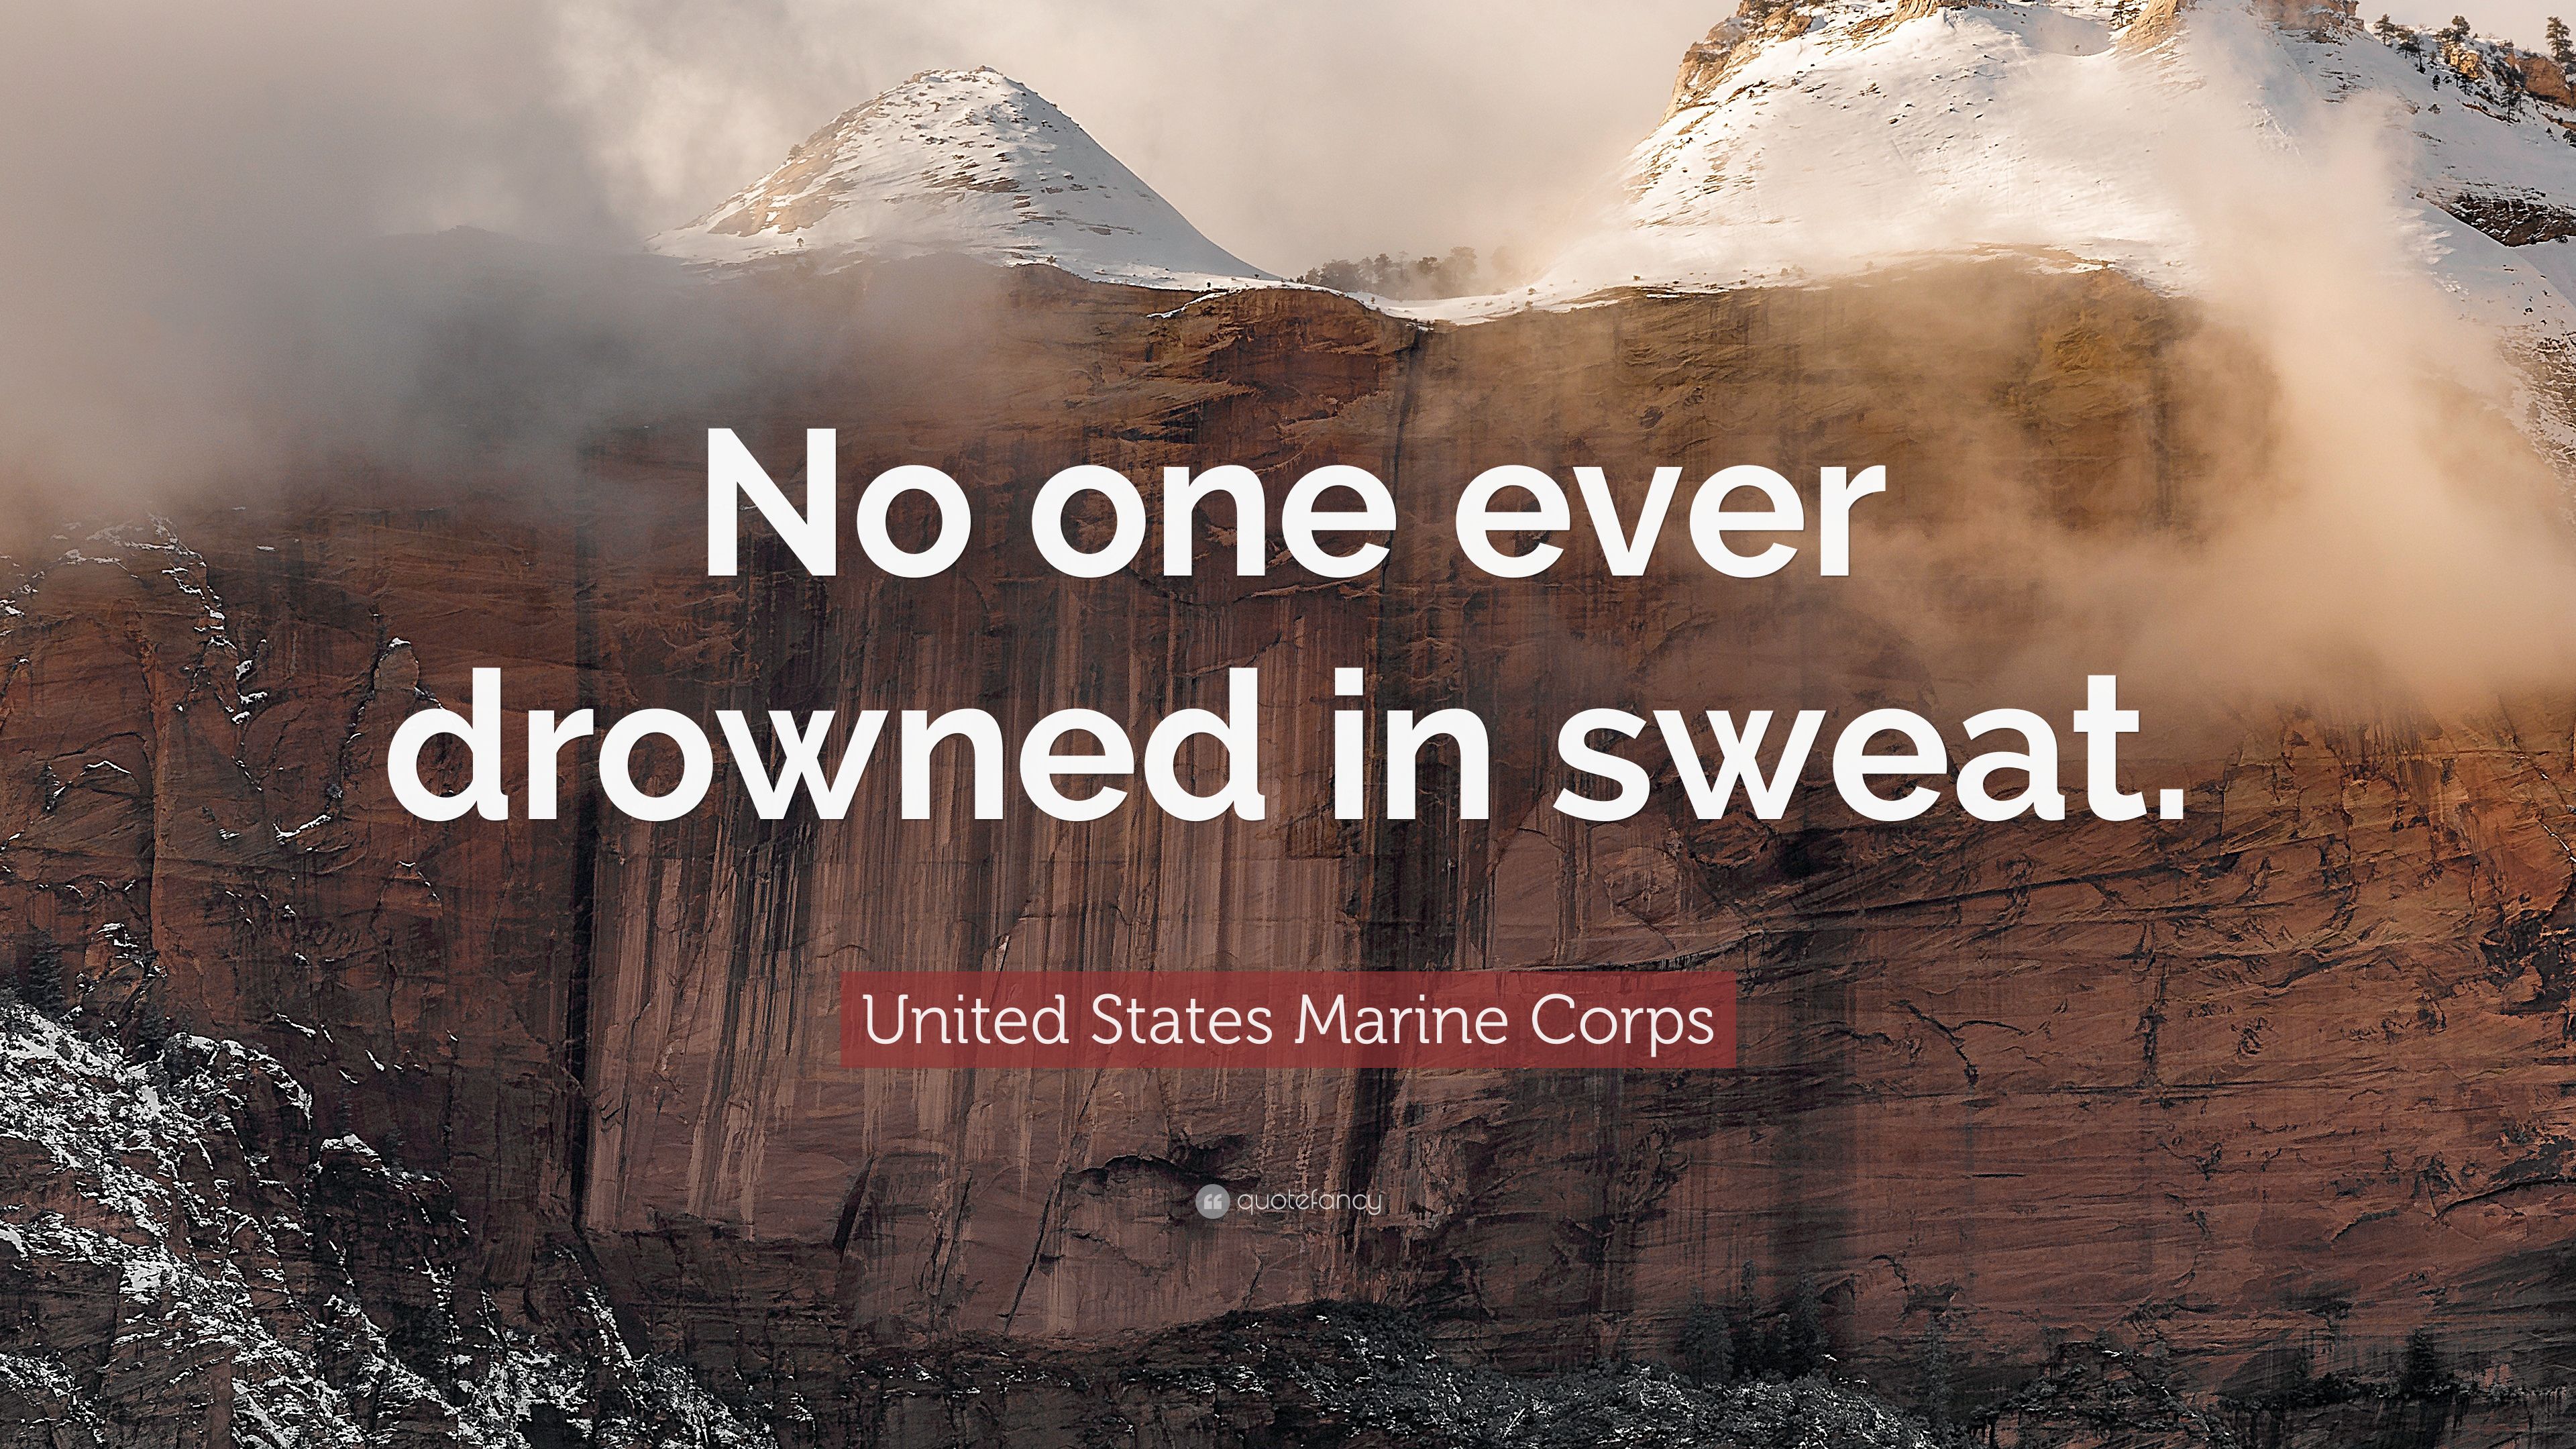 United States Marine Corps Quote: “No one ever drowned in sweat